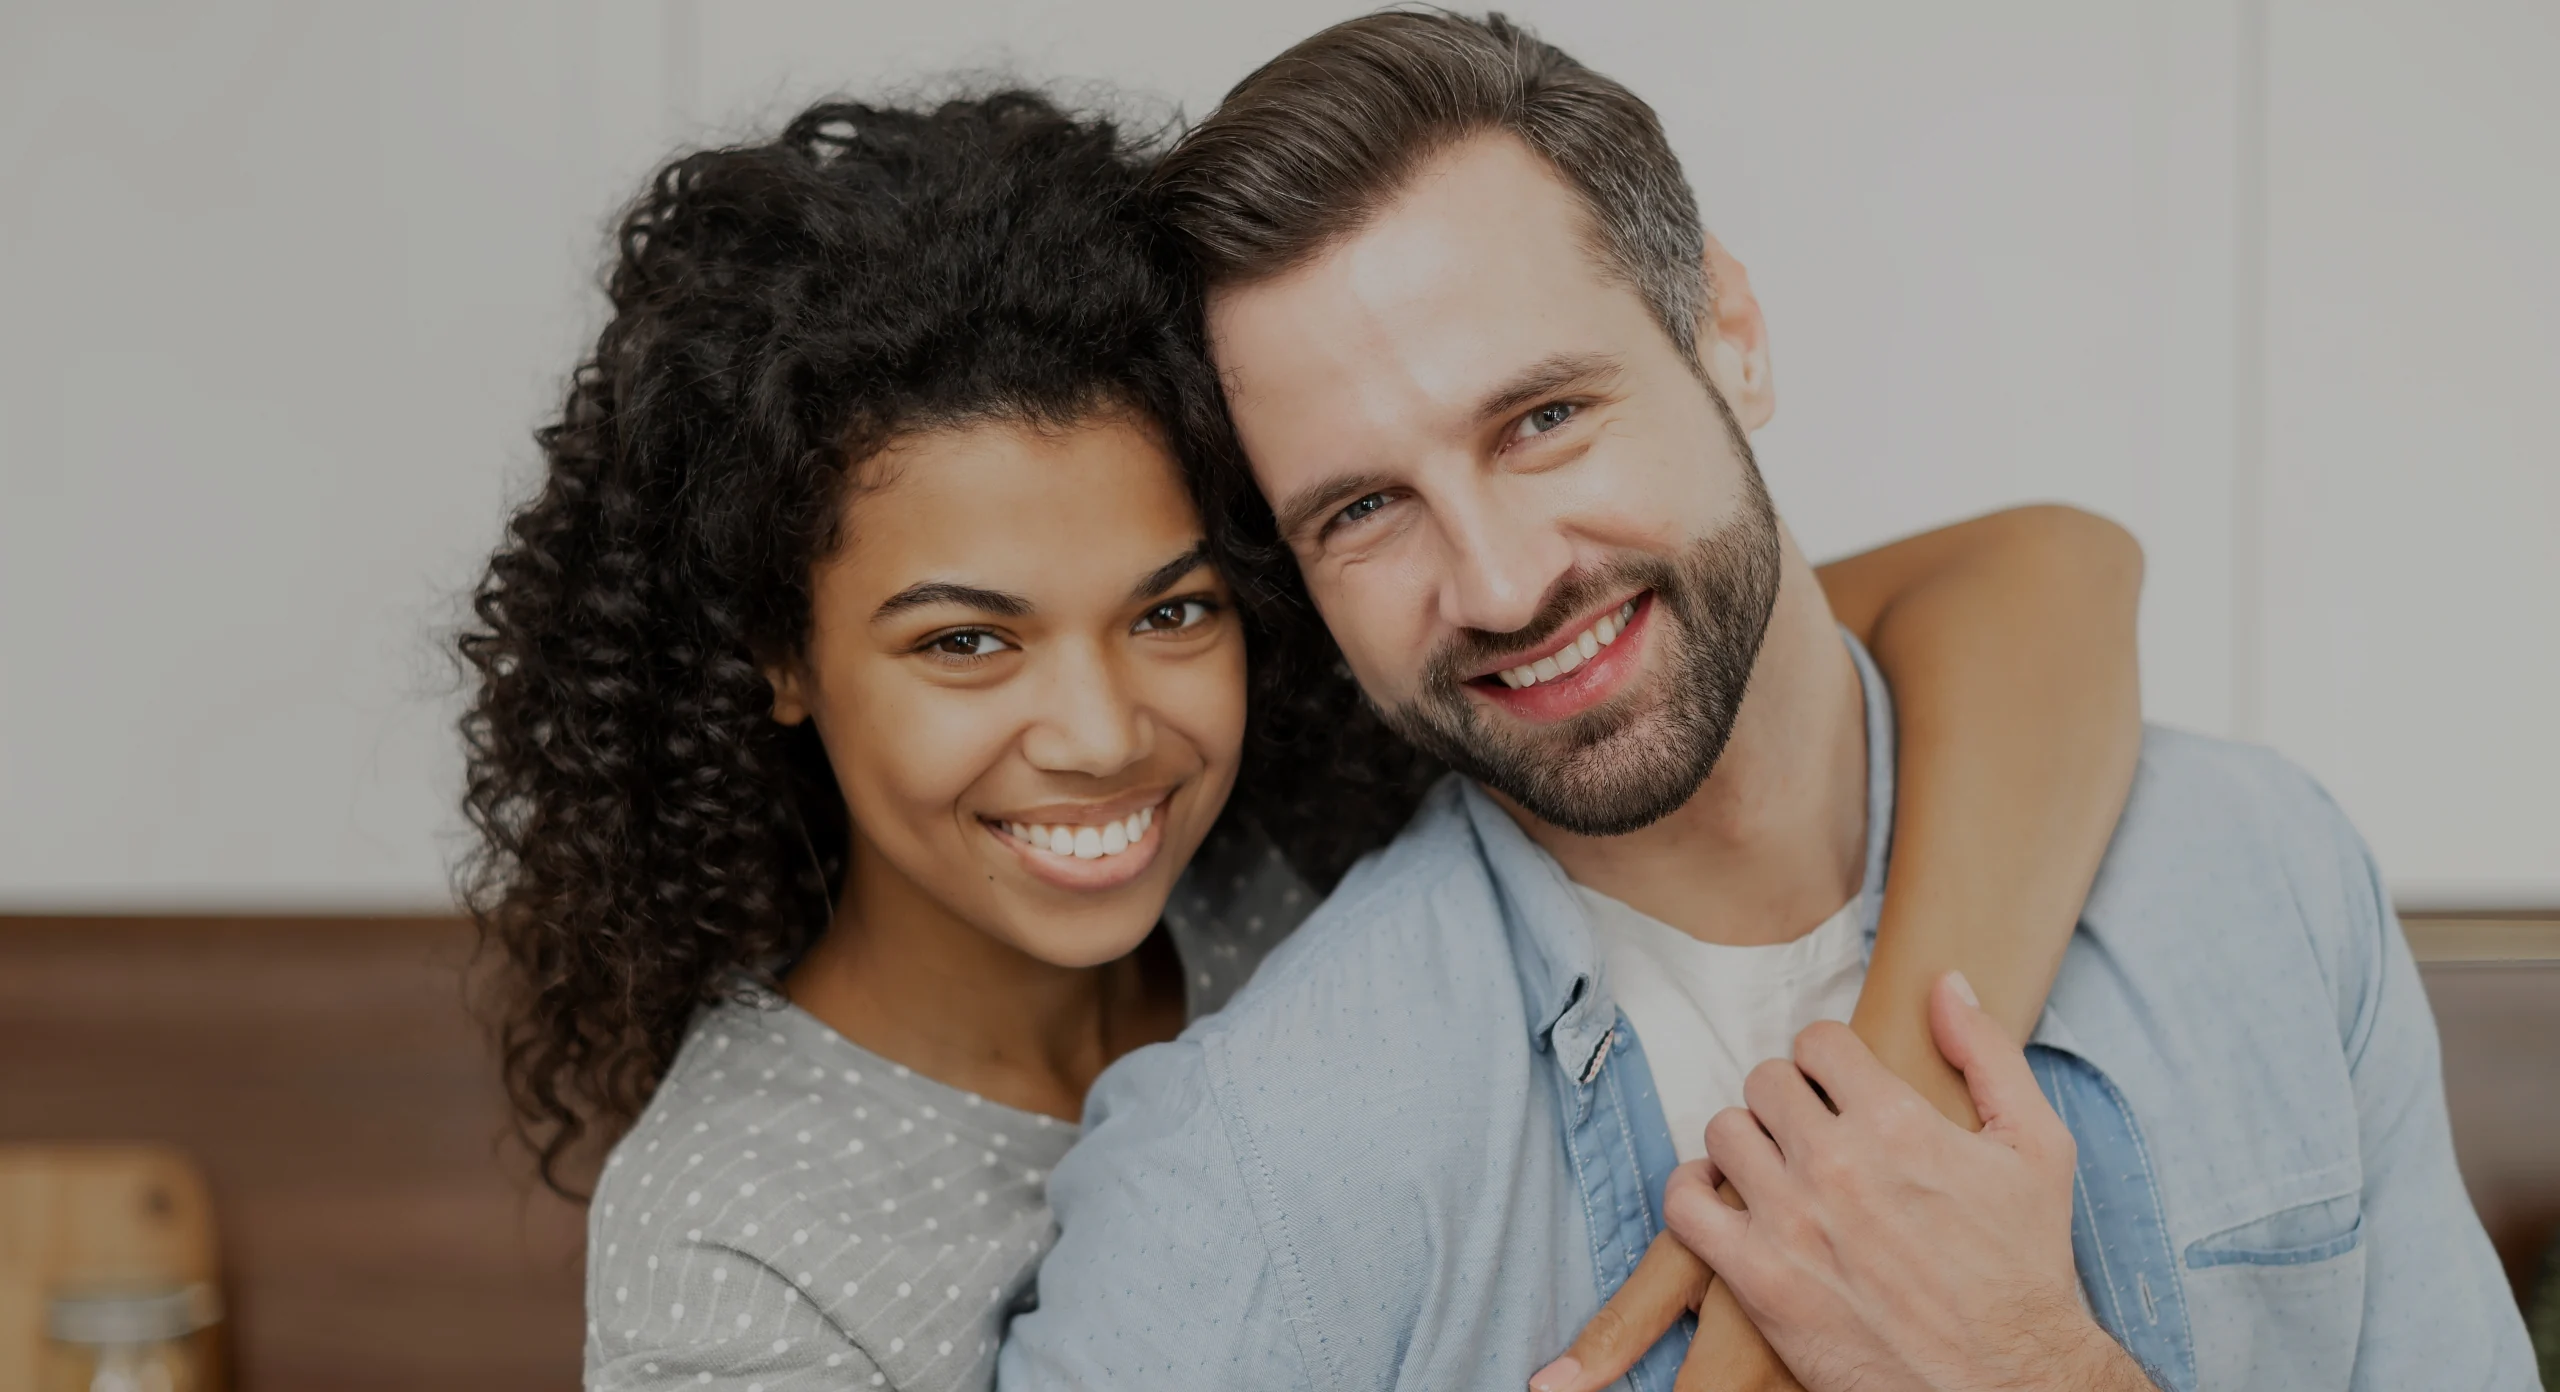 Interracial couple smiling at home